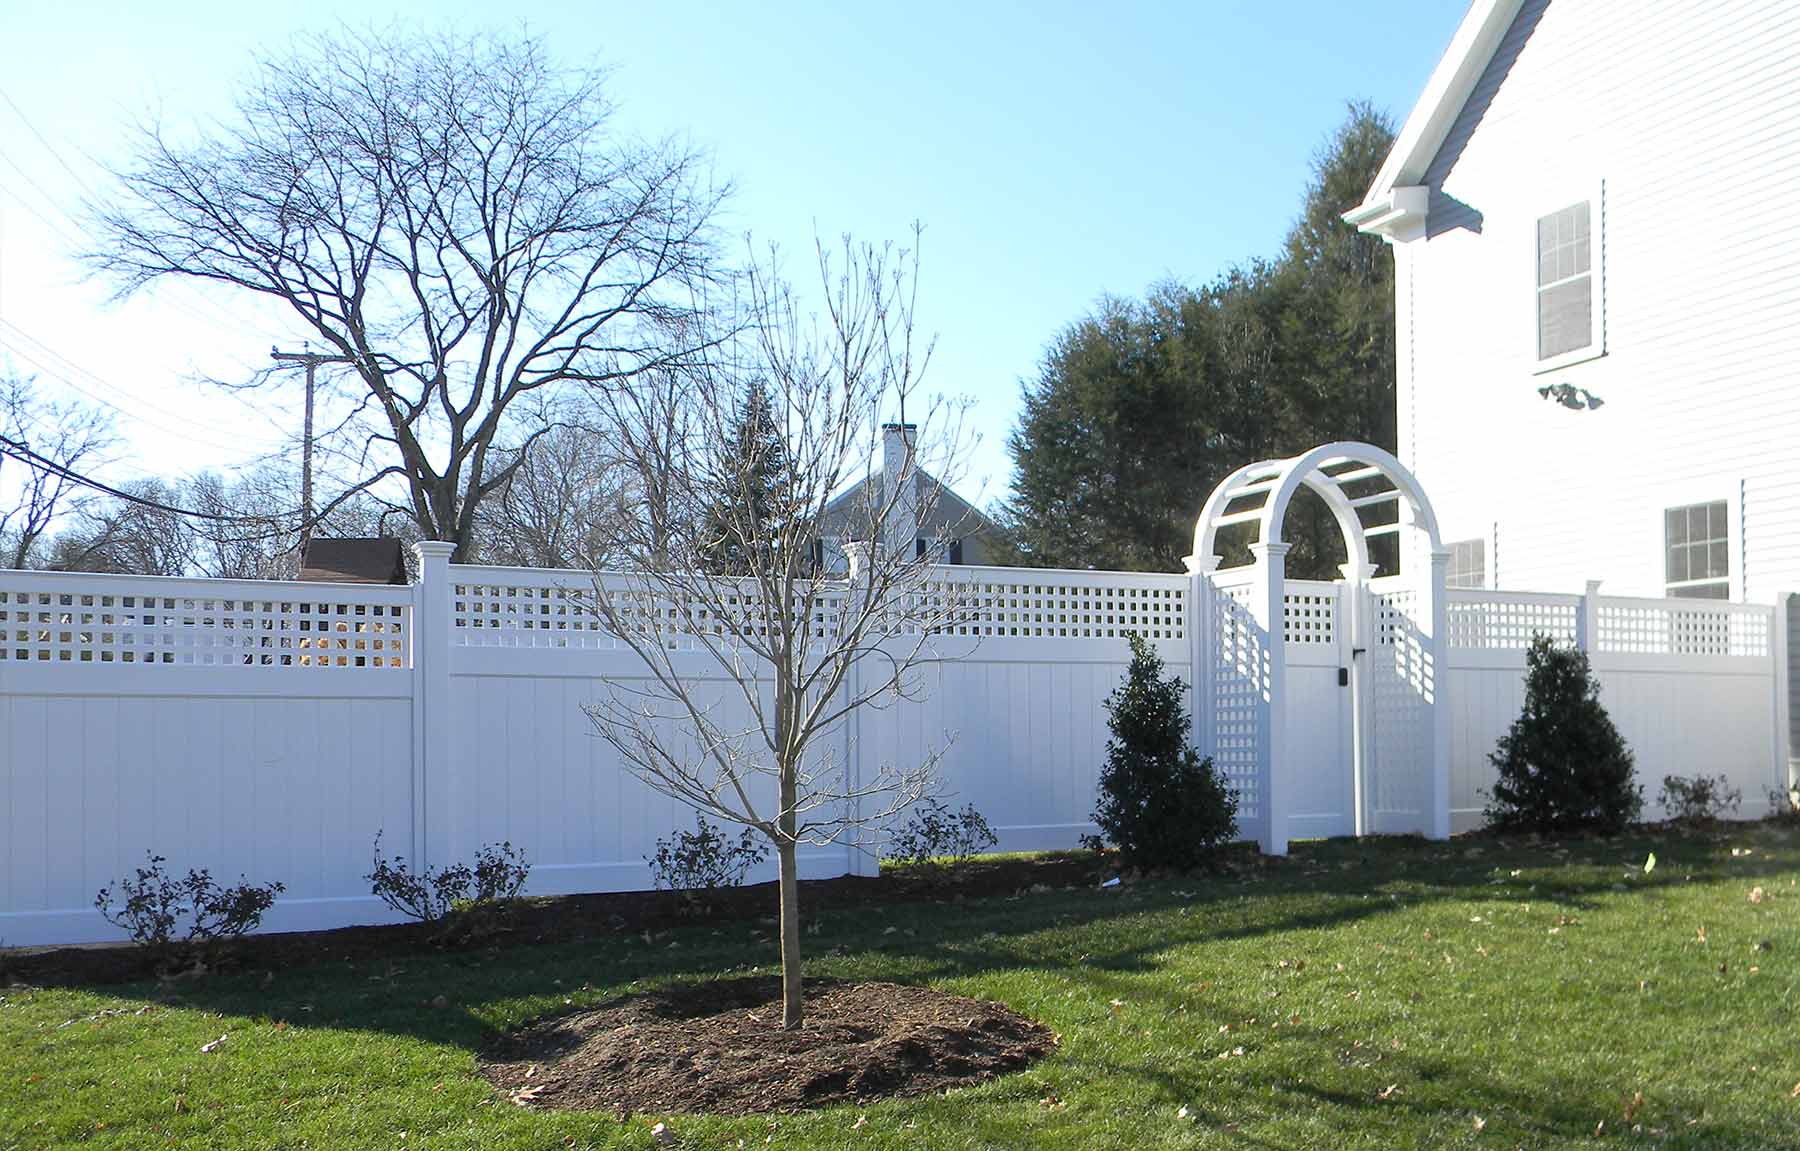 Fence Company in North Providence, Rhode Island - Bottom 4